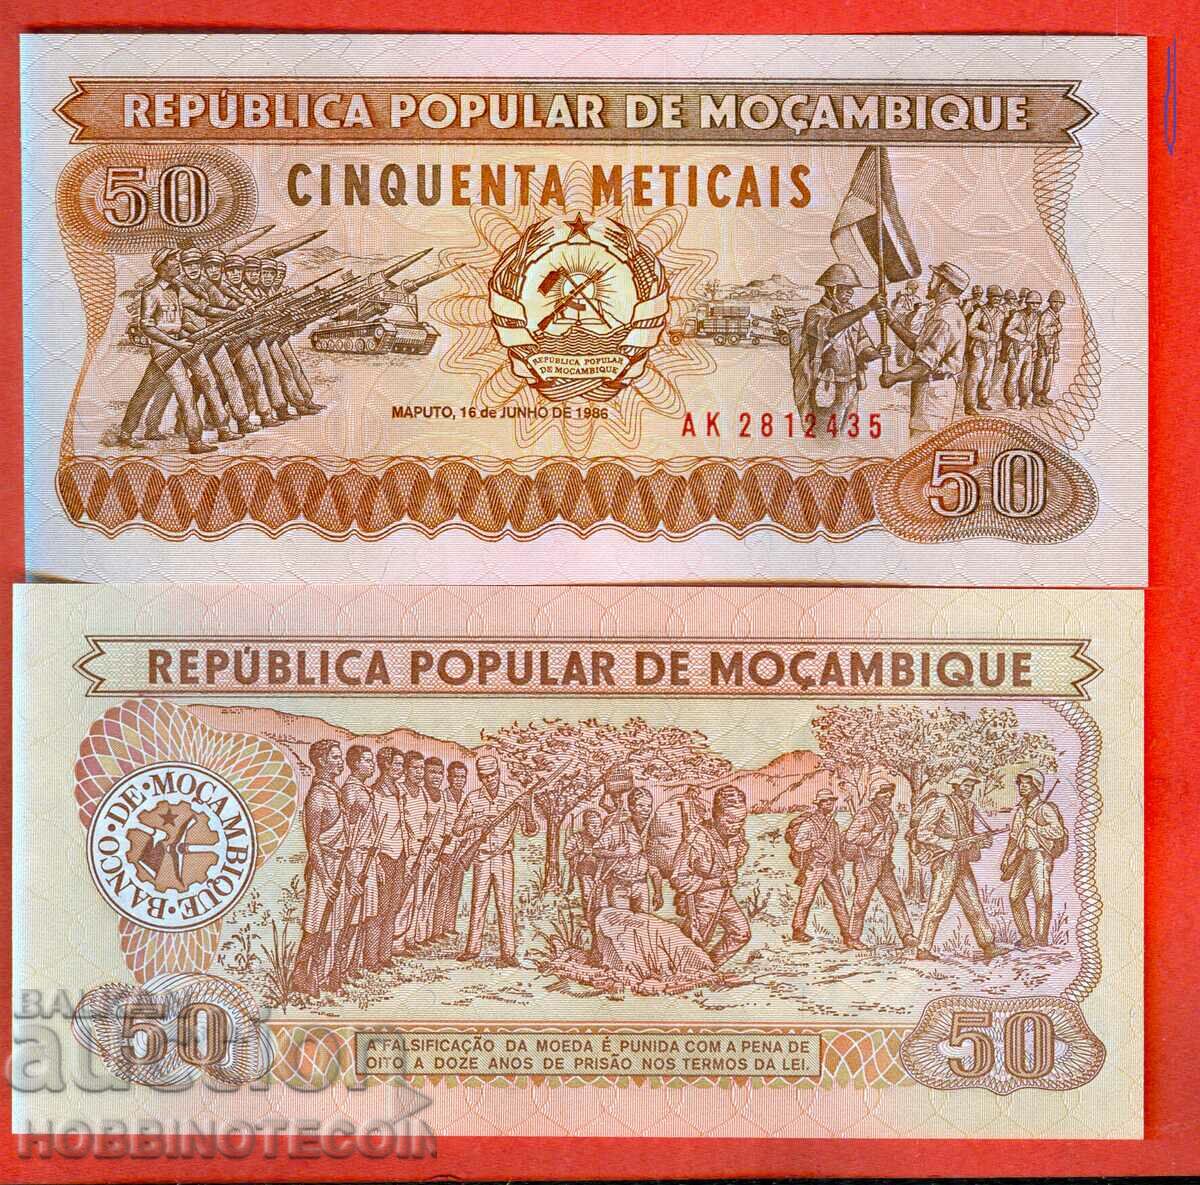 MOZAMBIQUE MOZAMBIQUE 50 Metical issue issue 1986 NEW UNC